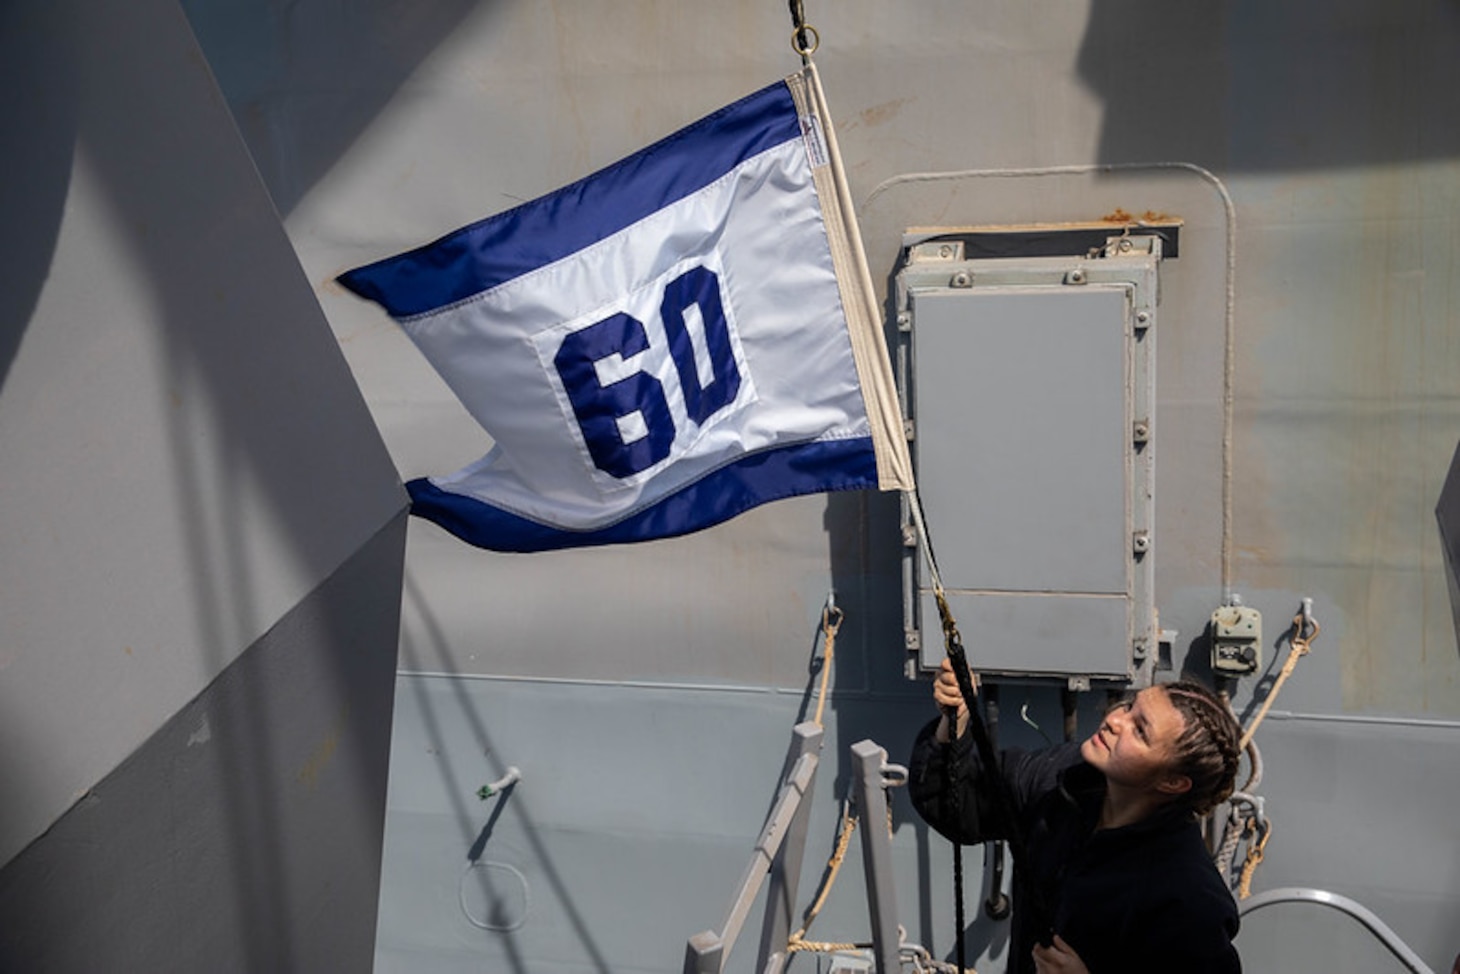 210415-N-CJ510-0159 MEDITERRANEAN SEA (April 15, 2021) Quartermaster Seaman Caityln Menze raises the Destroyer Squadron 60 pennant aboard the Arleigh Burke-class guided-missile destroyer USS Roosevelt (DDG 80), April 15, 2021. Roosevelt, forward-deployed to Rota, Spain, is on its second patrol in the U.S. Sixth Fleet area of operations in support of regional allies and partners and U.S. national security interests in Europe and Africa. (U.S. Navy photo by Mass Communication Specialist 2nd Class Andrea Rumple/Released)